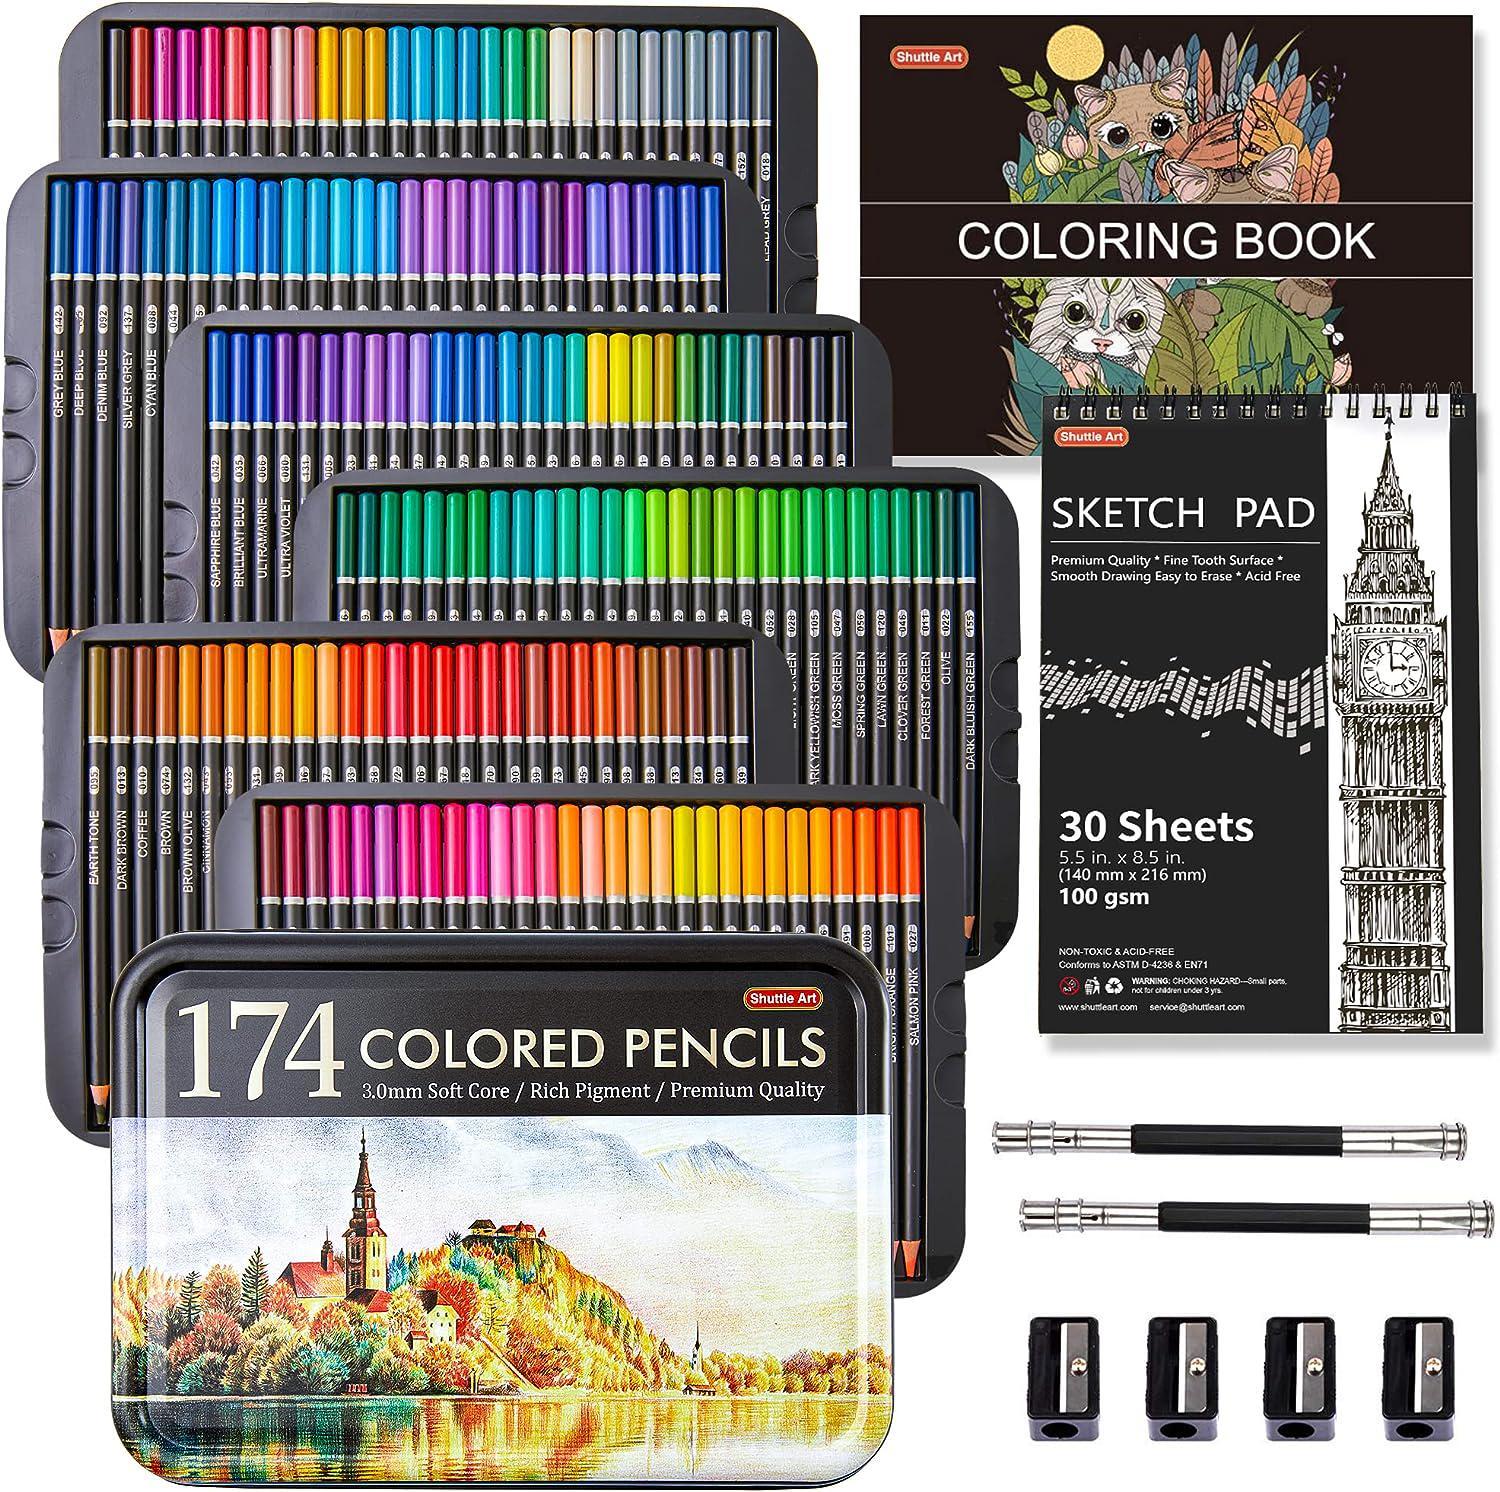  Shuttle Art 36 Skin Tone Colored Pencils, Colored Pencils for  Adult Coloring, Soft Core Color Pencils, Coloring Pencils for Adults Kids  Artists Beginners Drawing Coloring Sketching : Arts, Crafts & Sewing